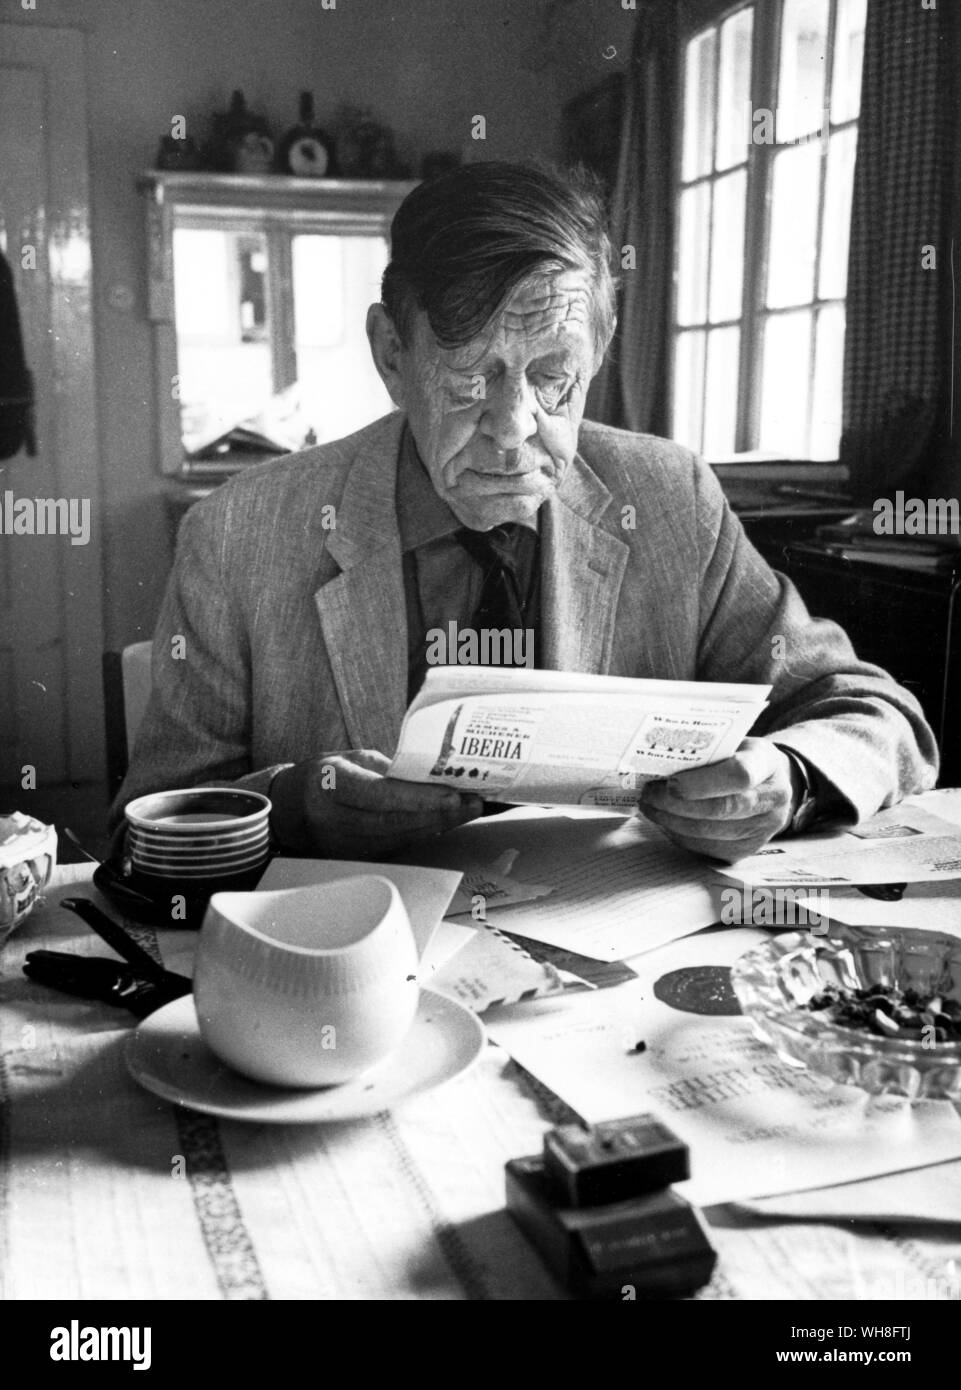 W H Auden. Wystan Hugh Auden (1907-1973) was an English poet and critic, widely regarded as among the most influential and important writers of the 20th century. He spent the first part of his life in the United Kingdom, but emigrated to the United States in 1939, becoming a U.S. citizen in 1946.. . Stock Photo